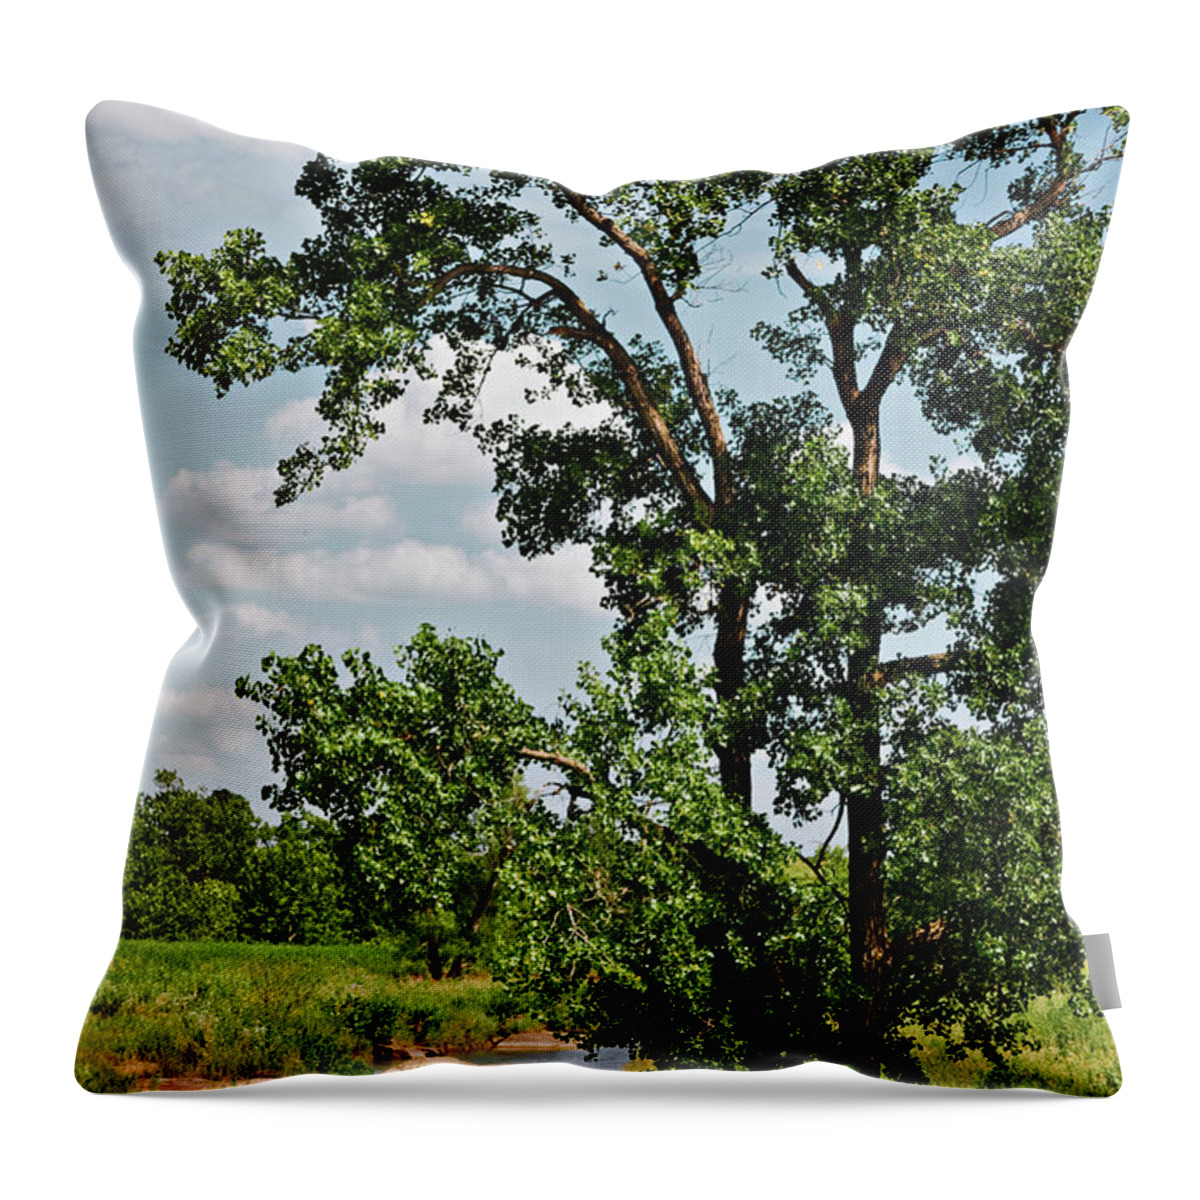 Ok Throw Pillow featuring the photograph Cotton By The Stream by Lana Trussell